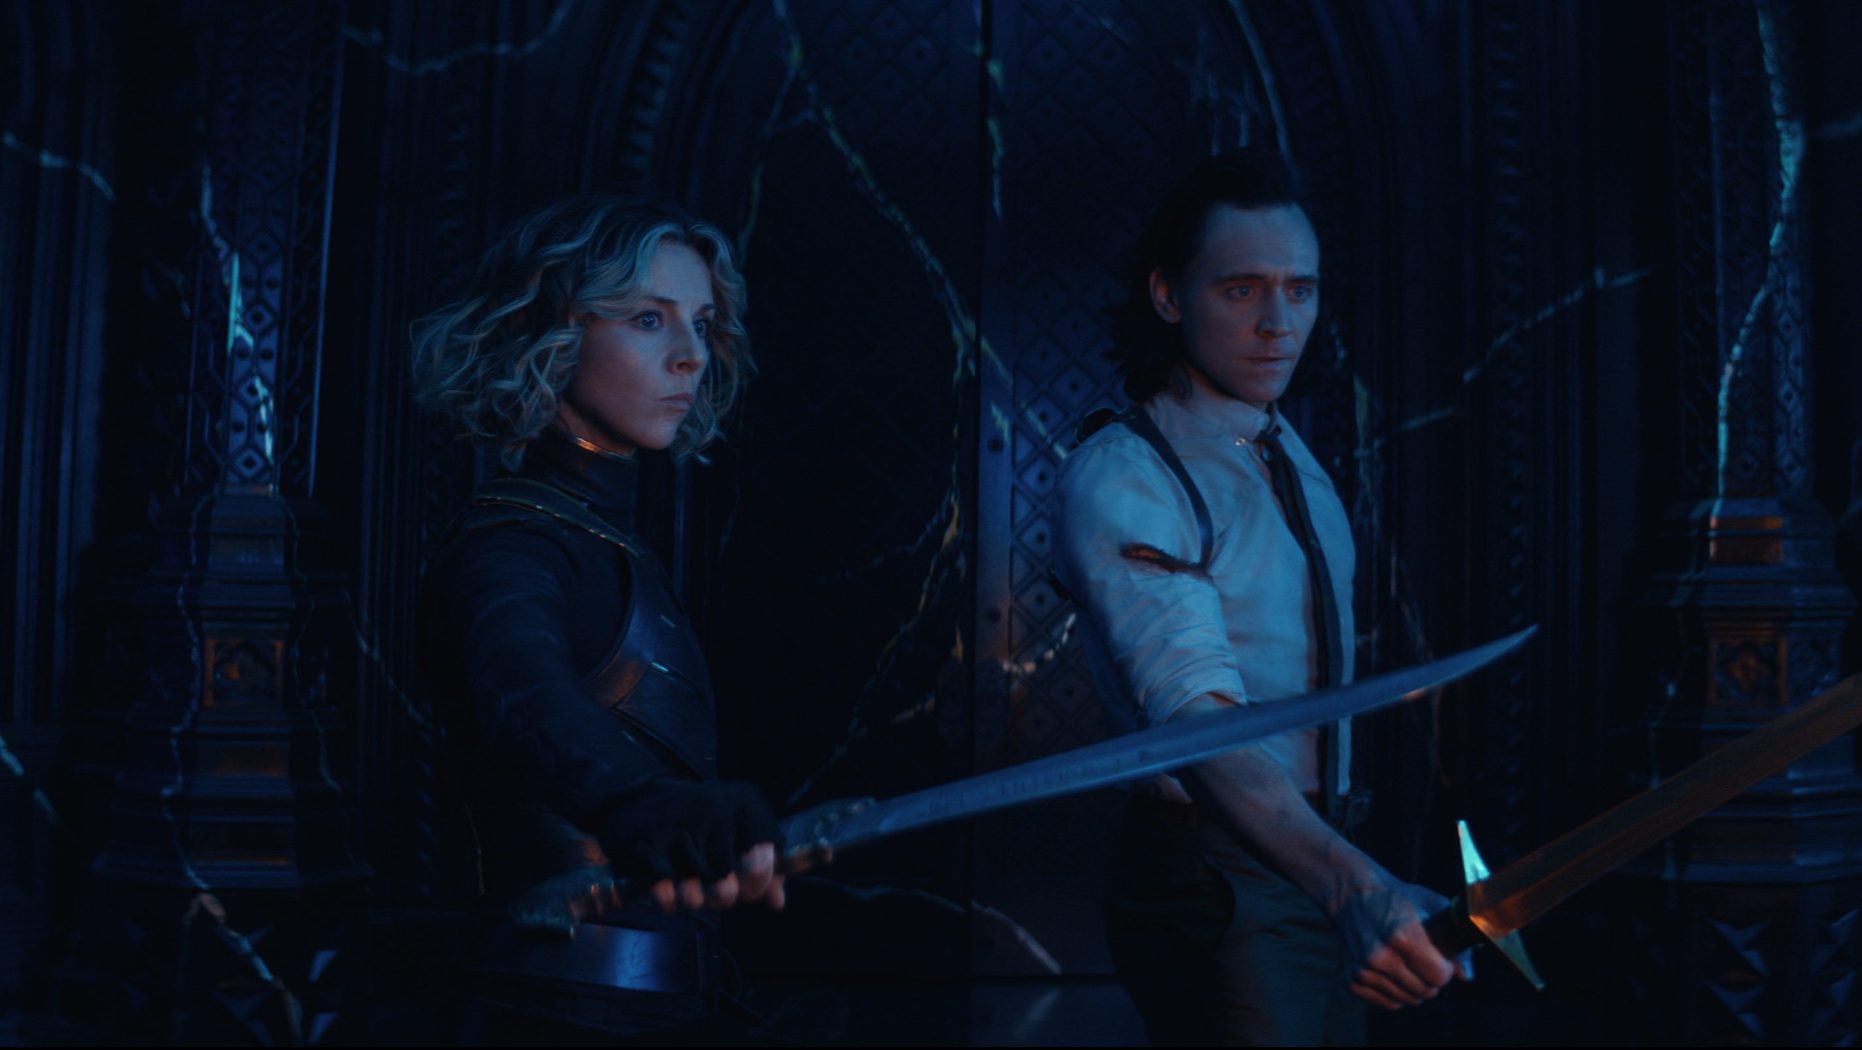 Loki (Tom Hiddleston) and Sylvie (Sophia Di Martino) holding out knives and learning who's behind the TVA, leaving questions for Season 2